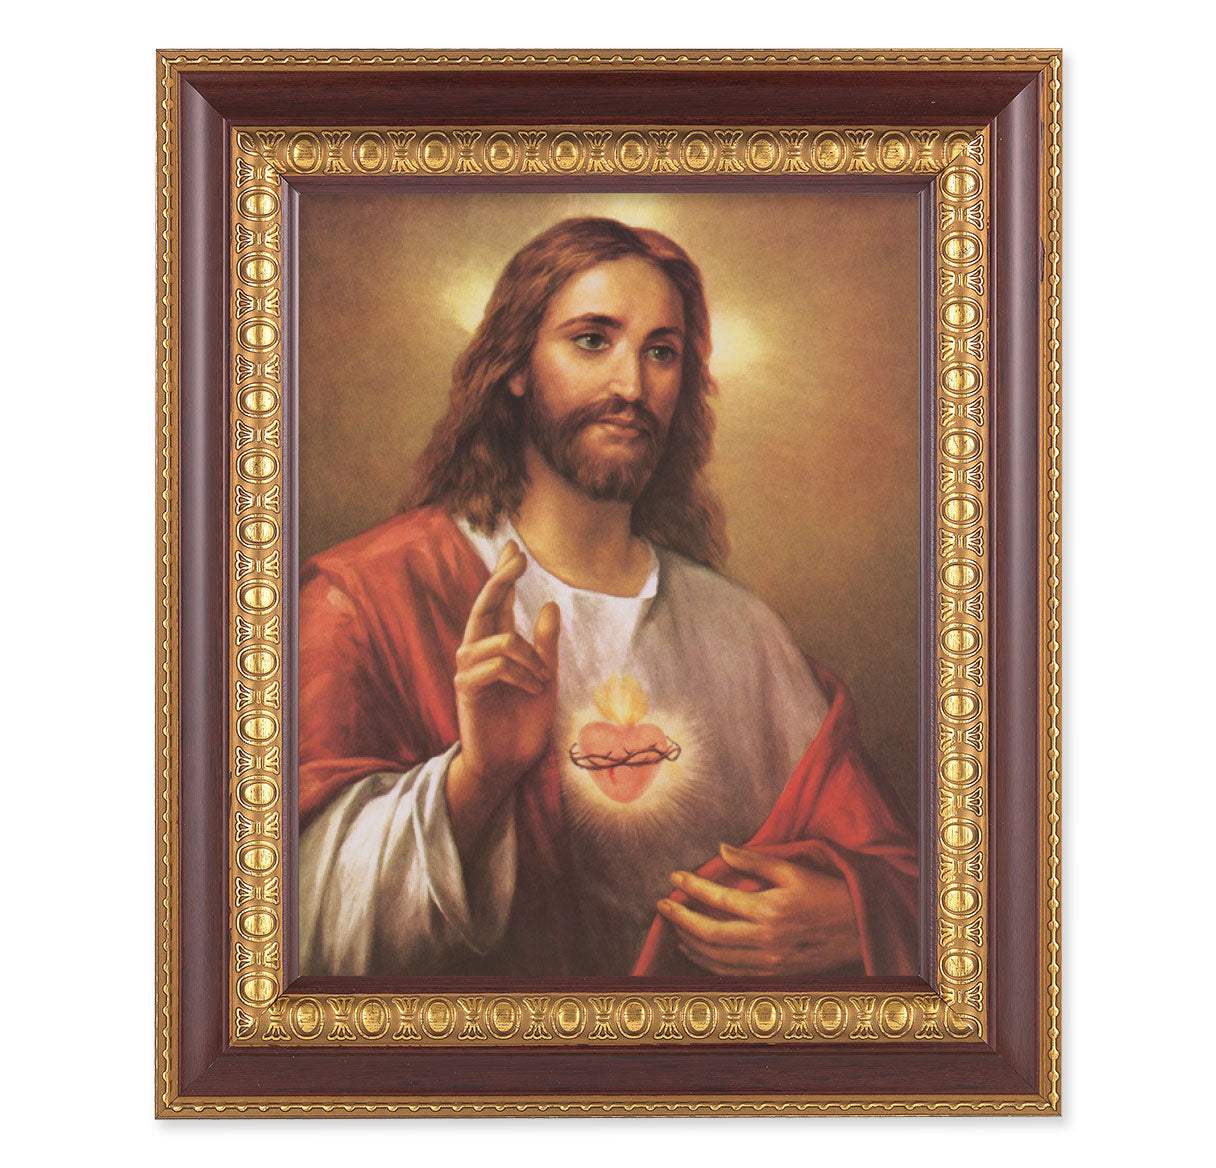 The Sacred Heart of Jesus (La Fuente) Picture Framed Wall Art Decor Large, Dark Cherry with Gold Egg and Dart Detailed Frame